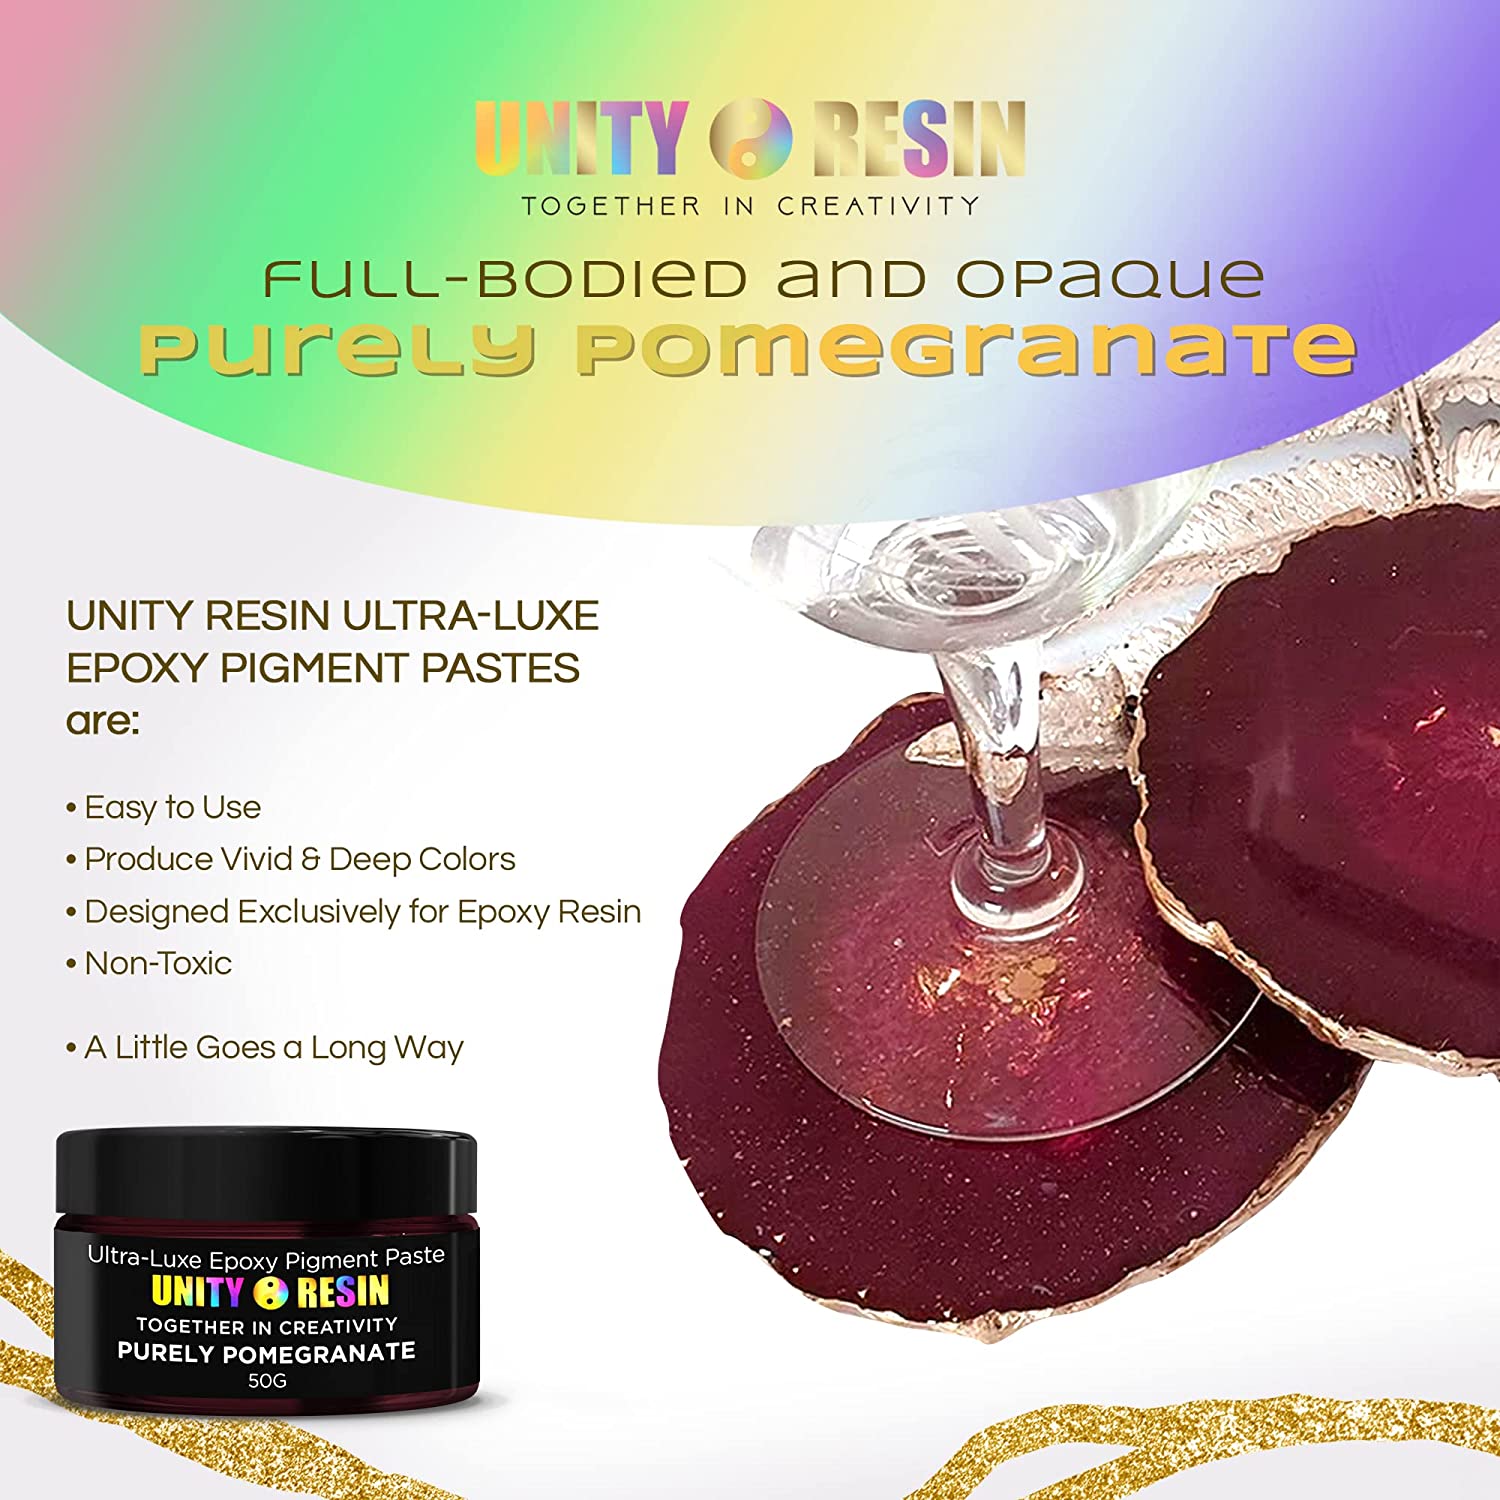 Ultra Luxe' Epoxy Pigment Paste-warm CASHMERE, Resin Craft, Resin Art,  Pearl Mica, Resin Color, Resin Pigments, Geode Art, Ivory Mica 50G 